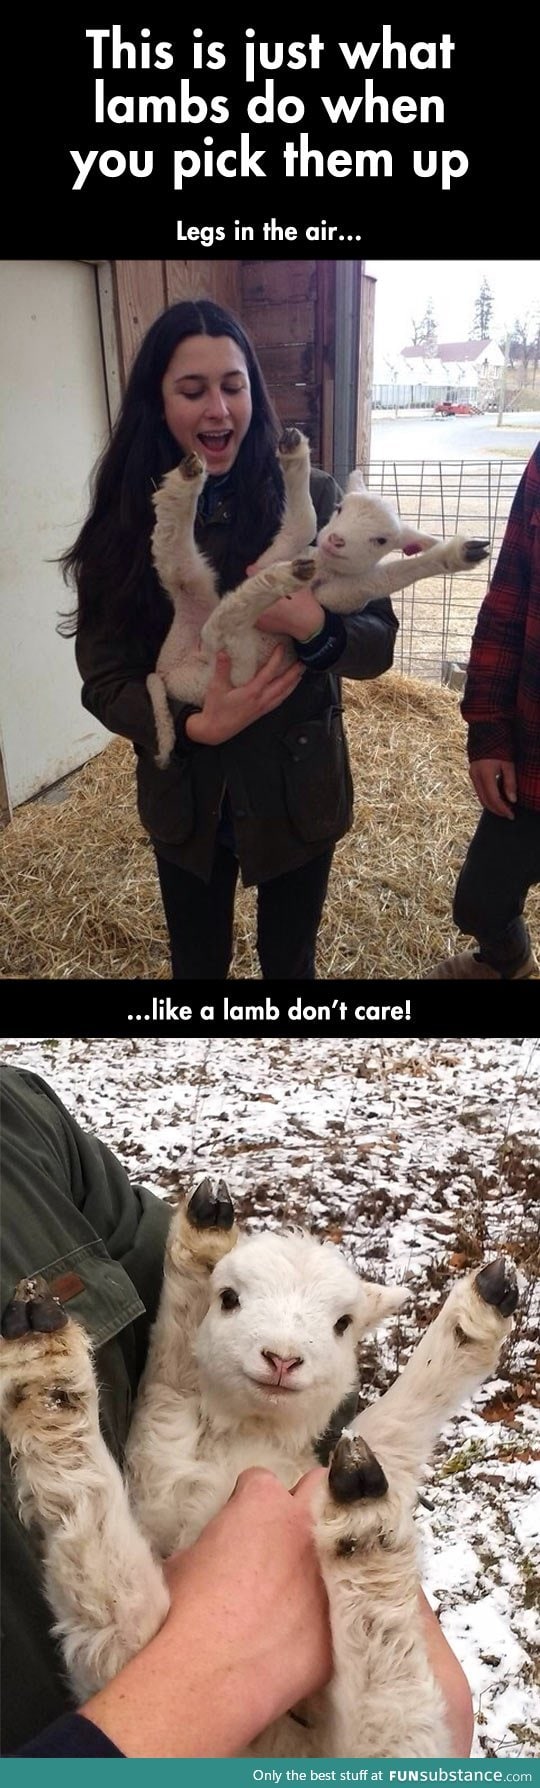 Lambs get adorable when you pick them up